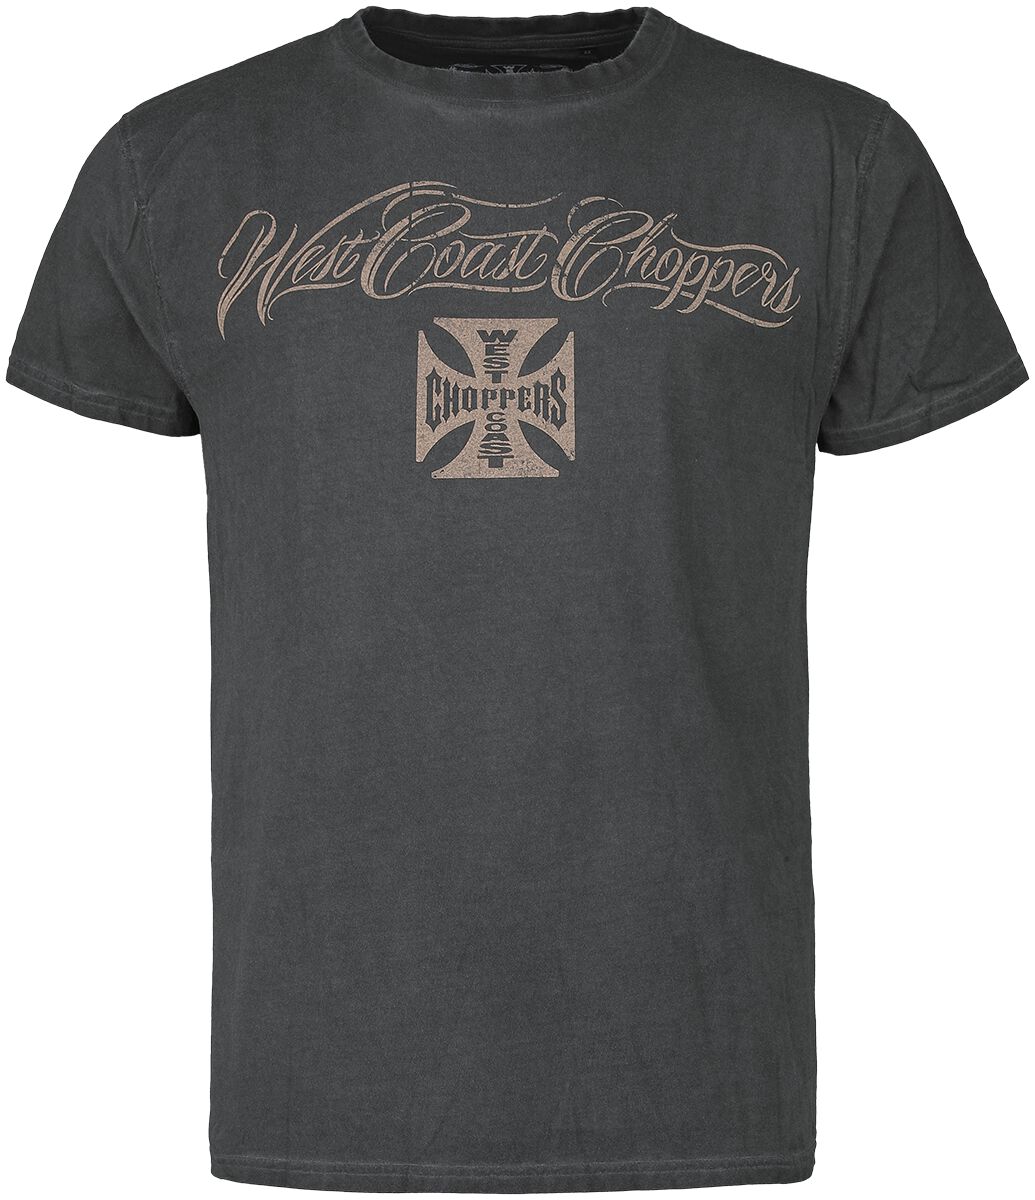 West Coast Choppers Eagle Crest T-Shirt anthrazit in 3XL